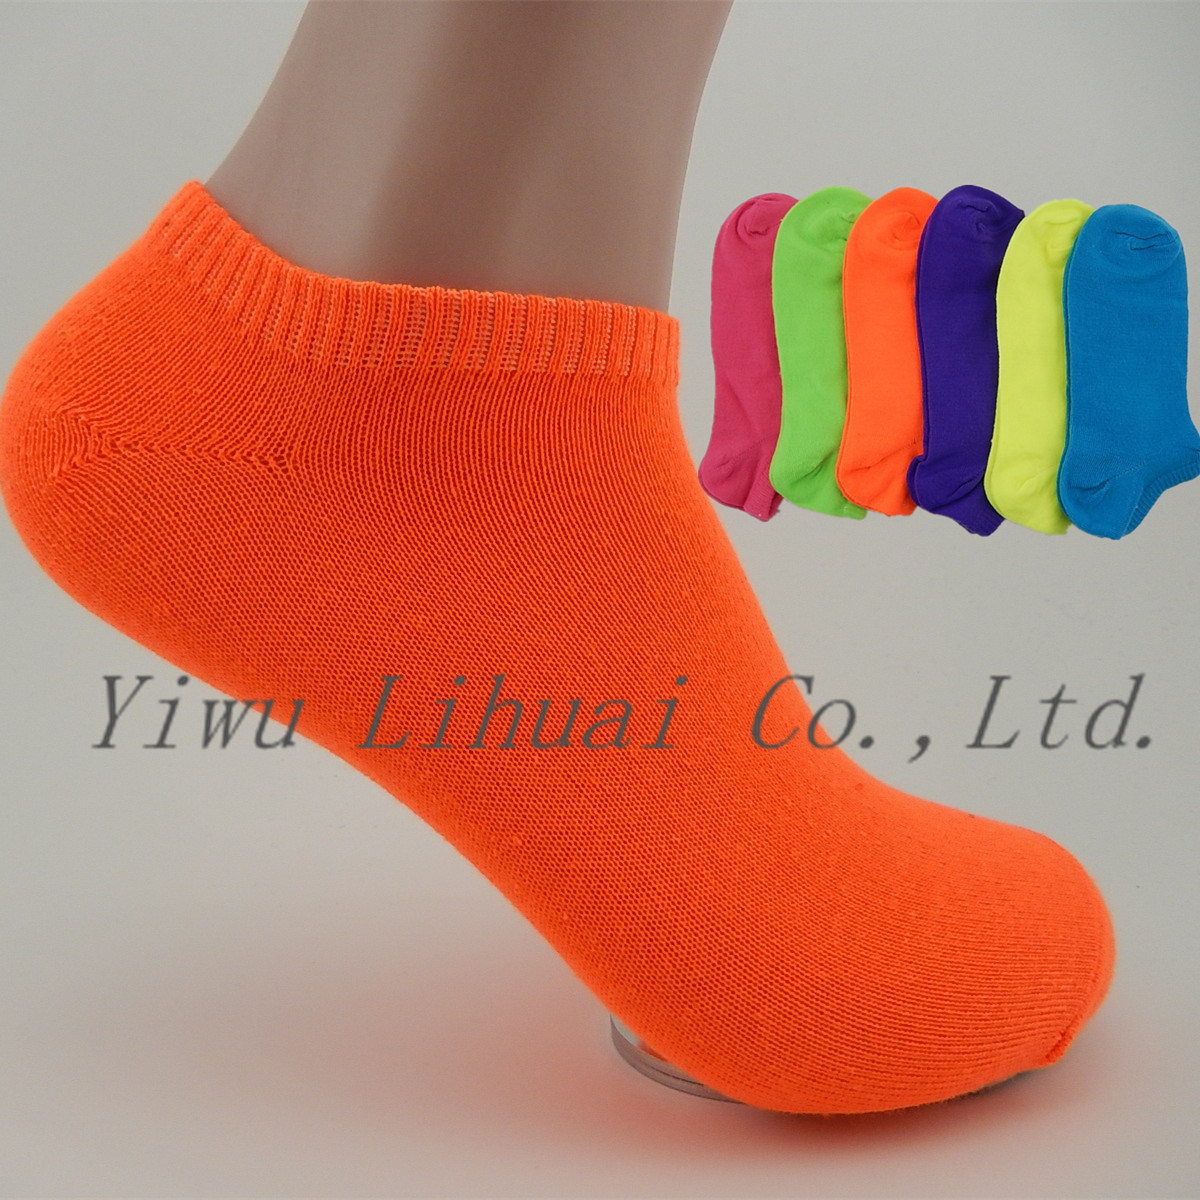 Bright-Colored Beautiful Ladies Soft Boat No Show Ankle Socks